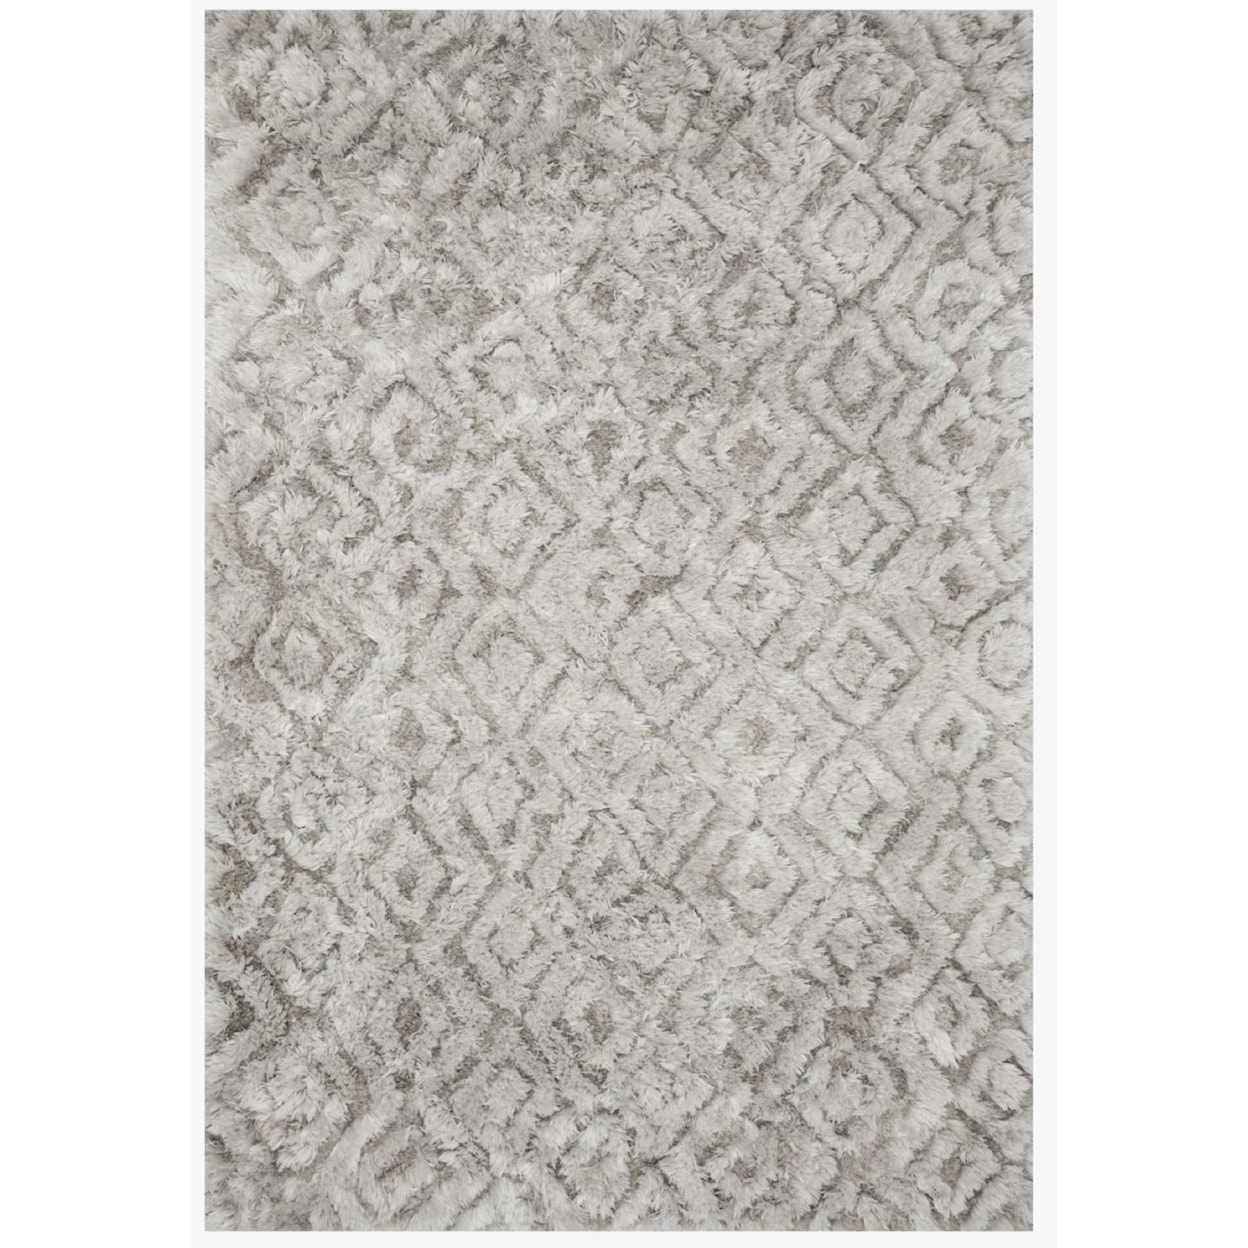 Reeds Rugs CASPIA 7-6 X 9-6 Silver Area Rug